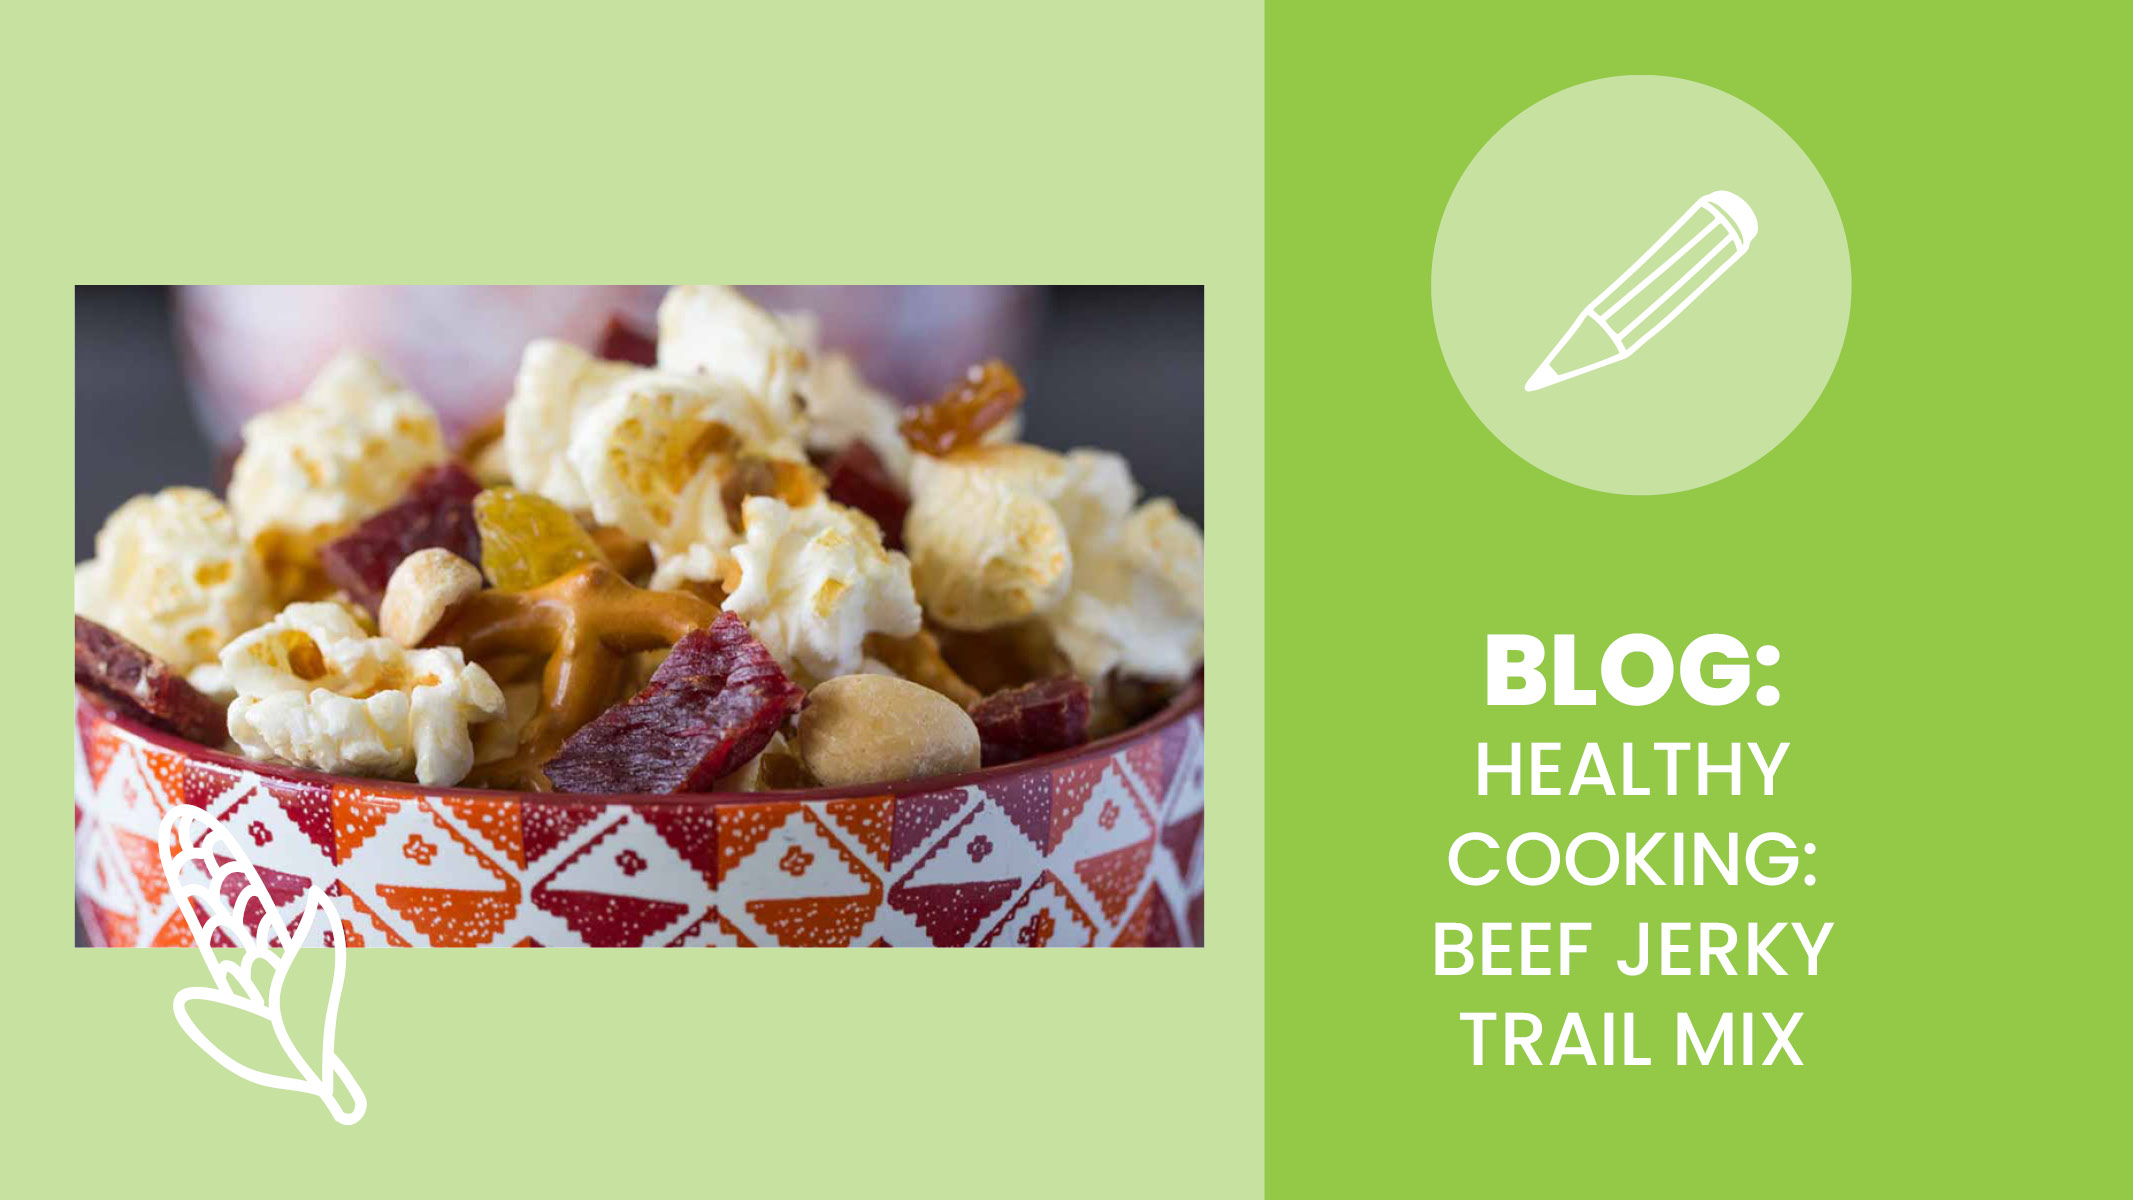 Healthy snack made with popcorn, beef jerky, pretzels, and more